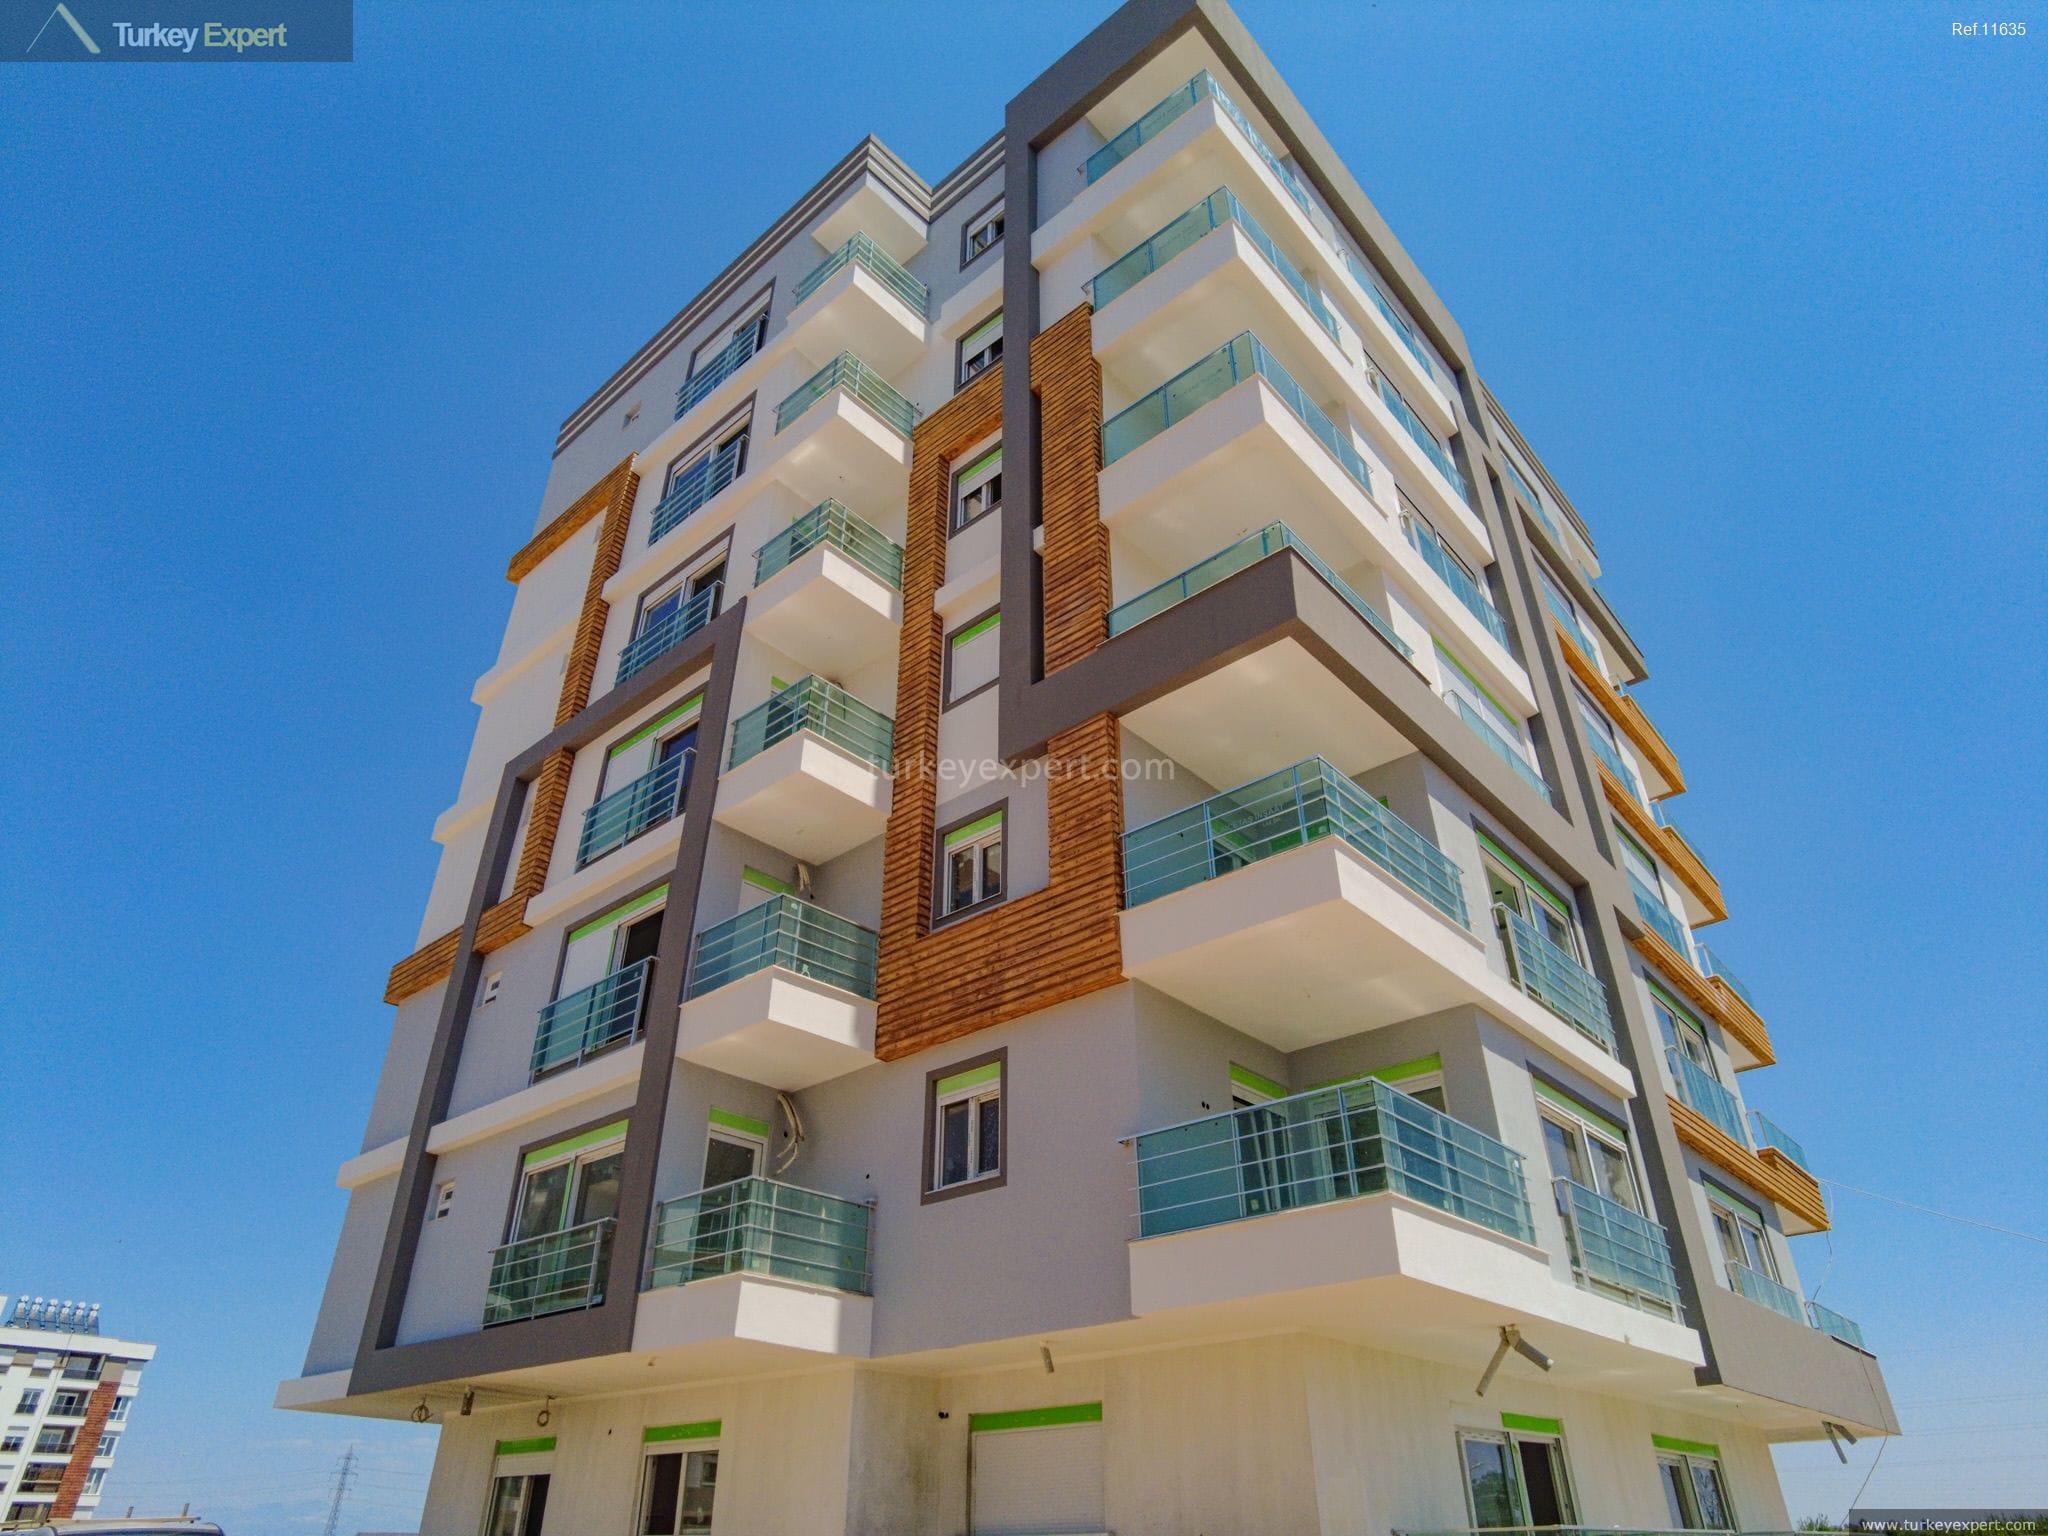 1new apartments for sale with an outdoor pool in kepez17